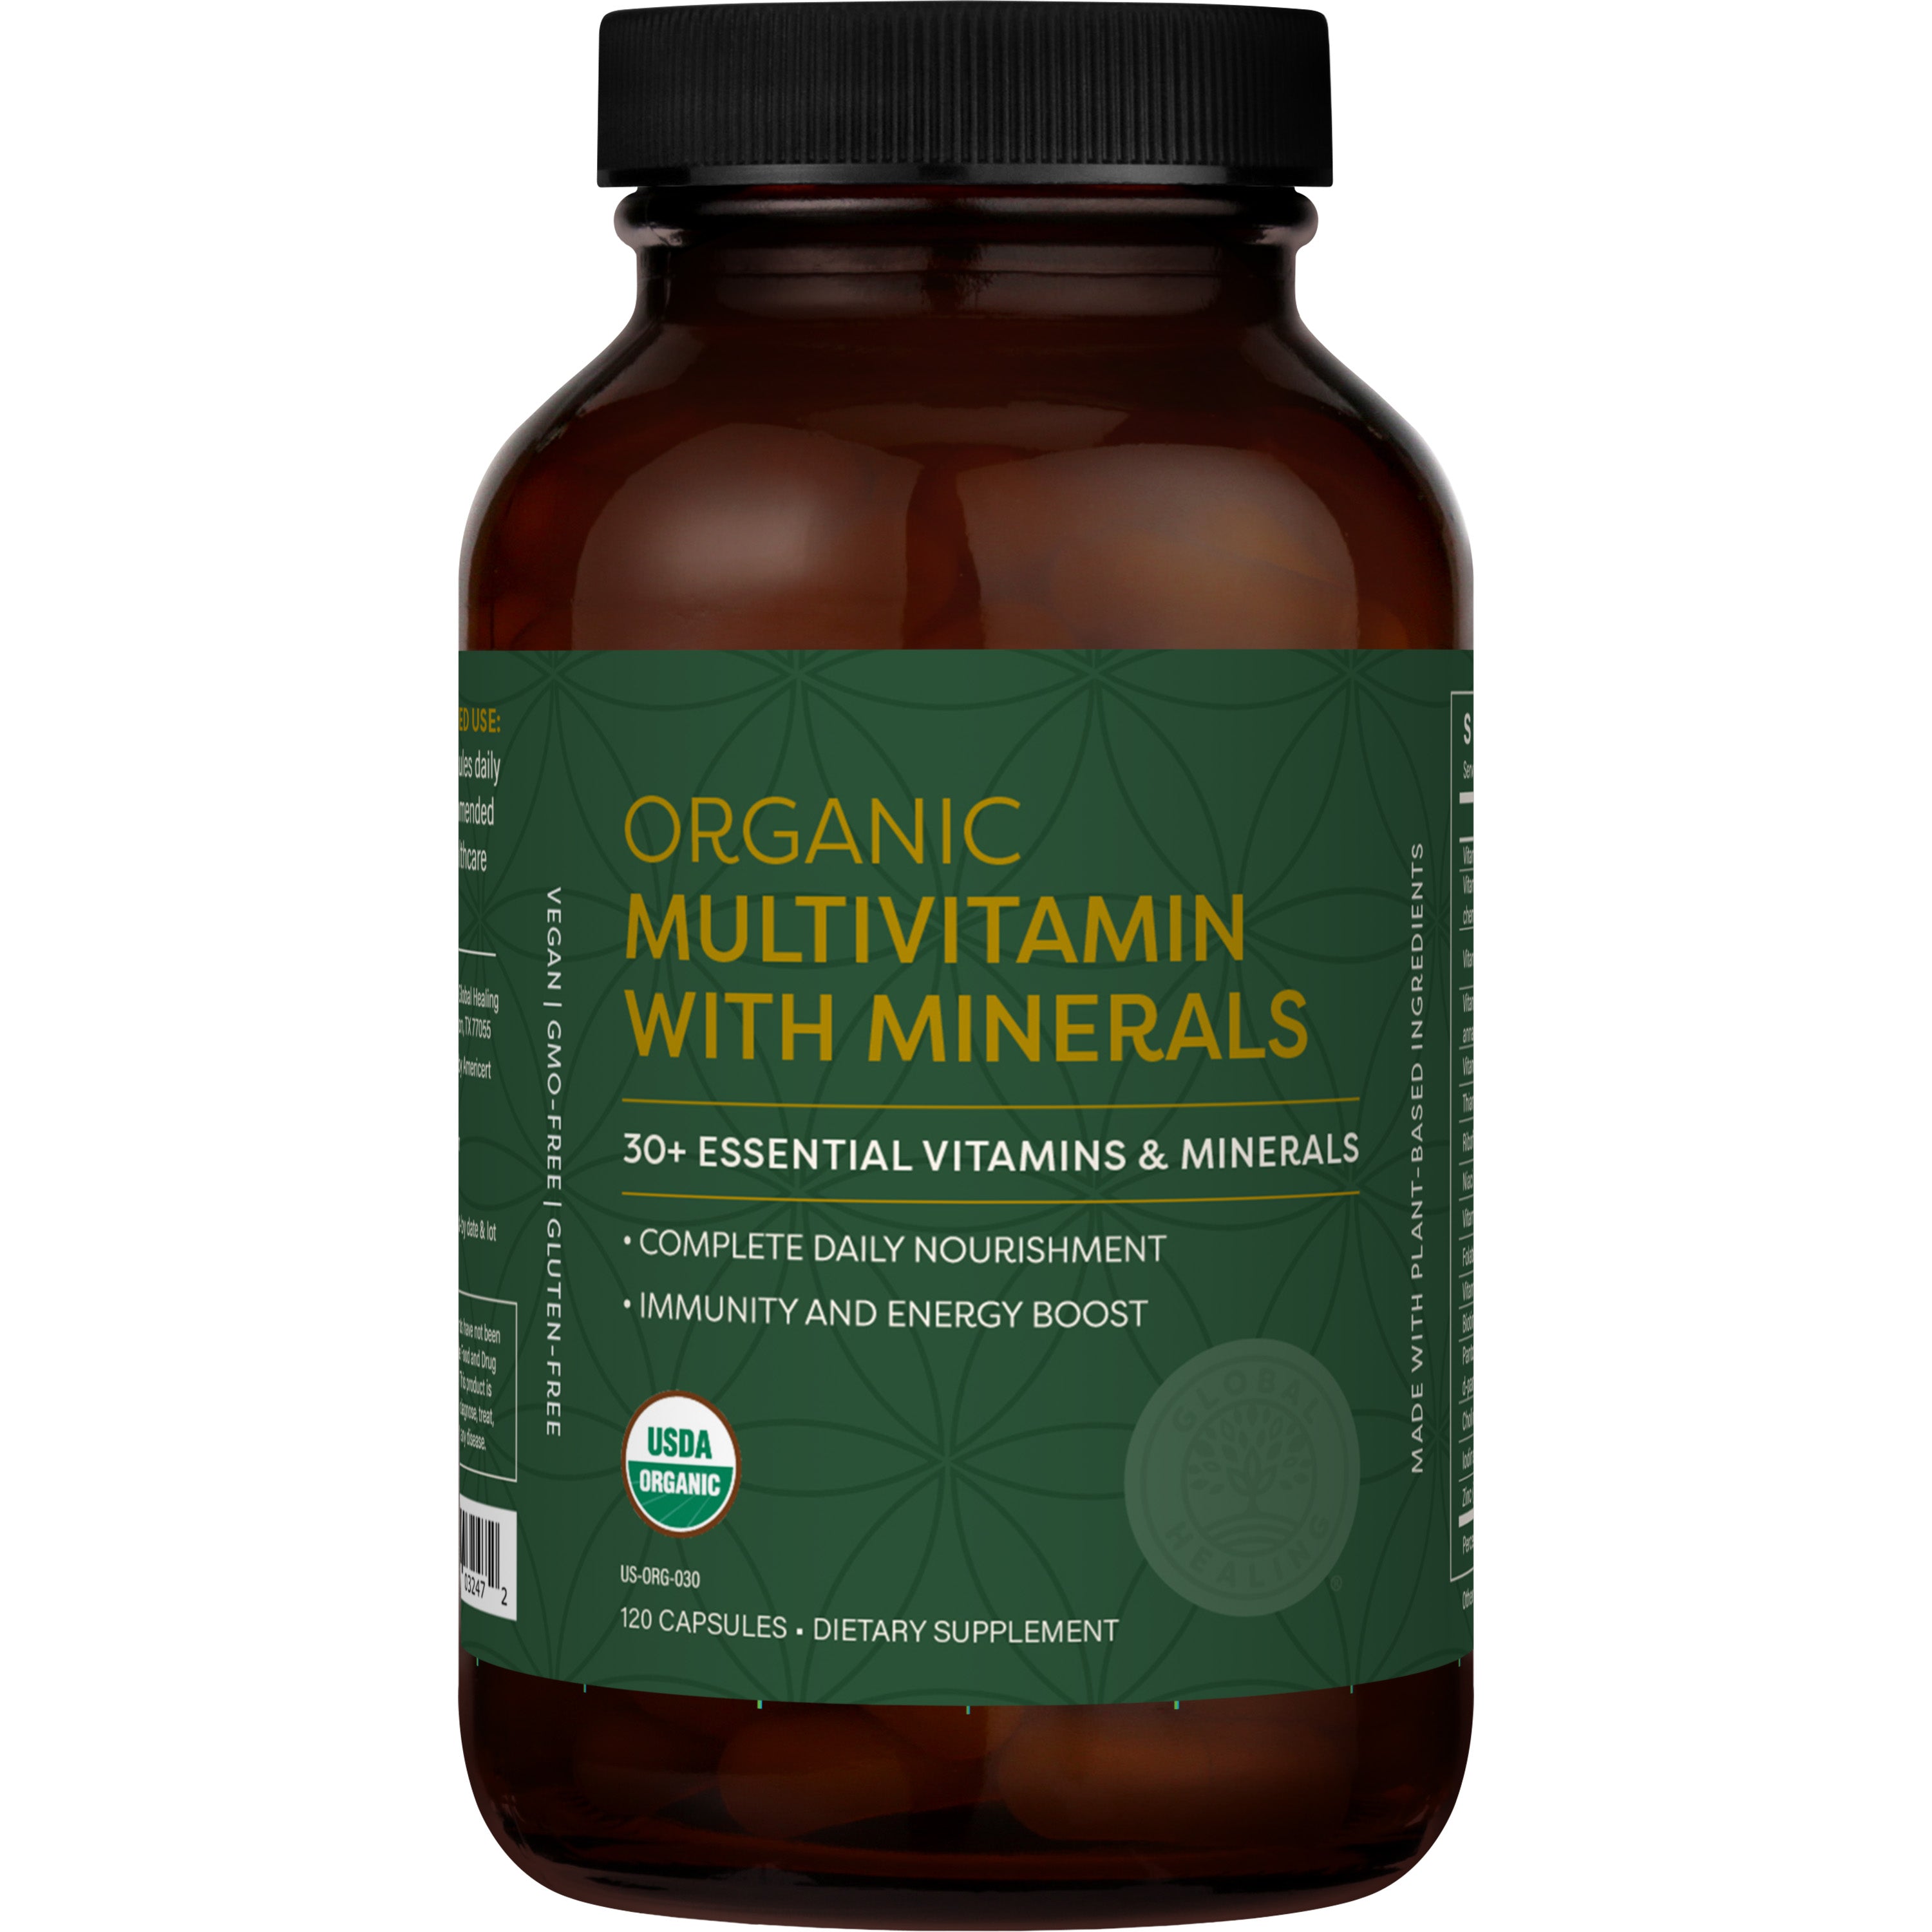 Global Healing Organic Mulitvitamin with minerals Bottle 120 capsules